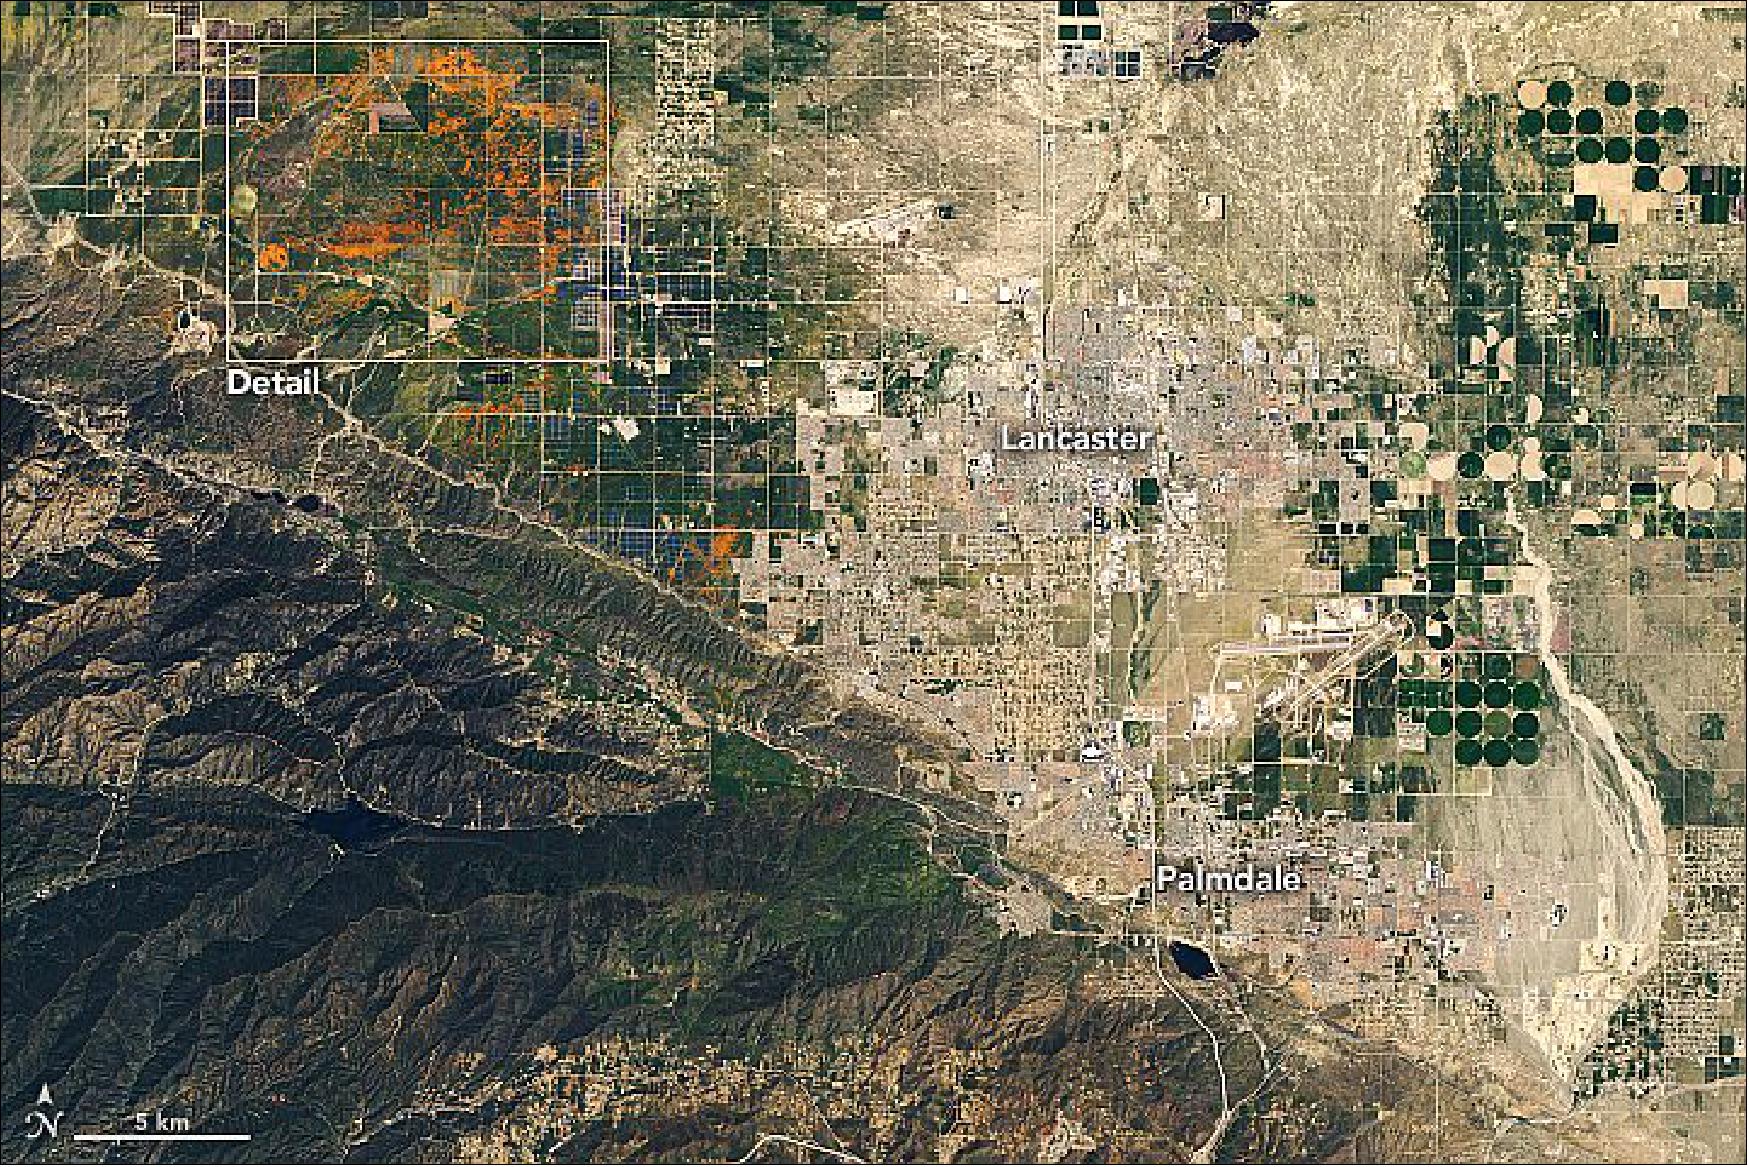 Figure 96: Larger OLI image of Southern California containing the poppy field detail in Antelope Valley (image credit: NASA Earth Observatory)